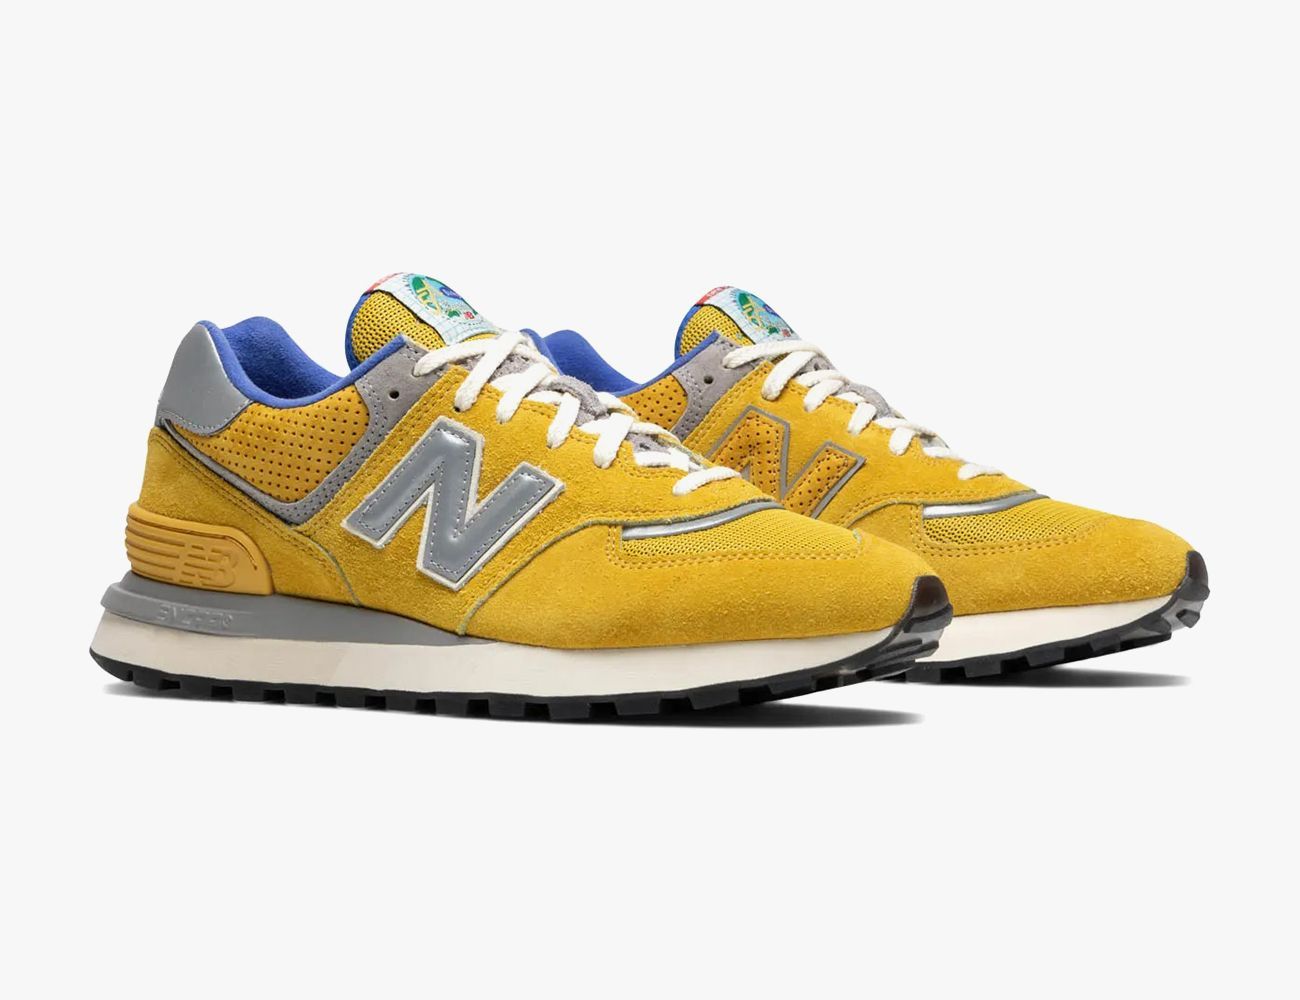 Bodega Takes New Balance Back in Time with the 574 Legacy